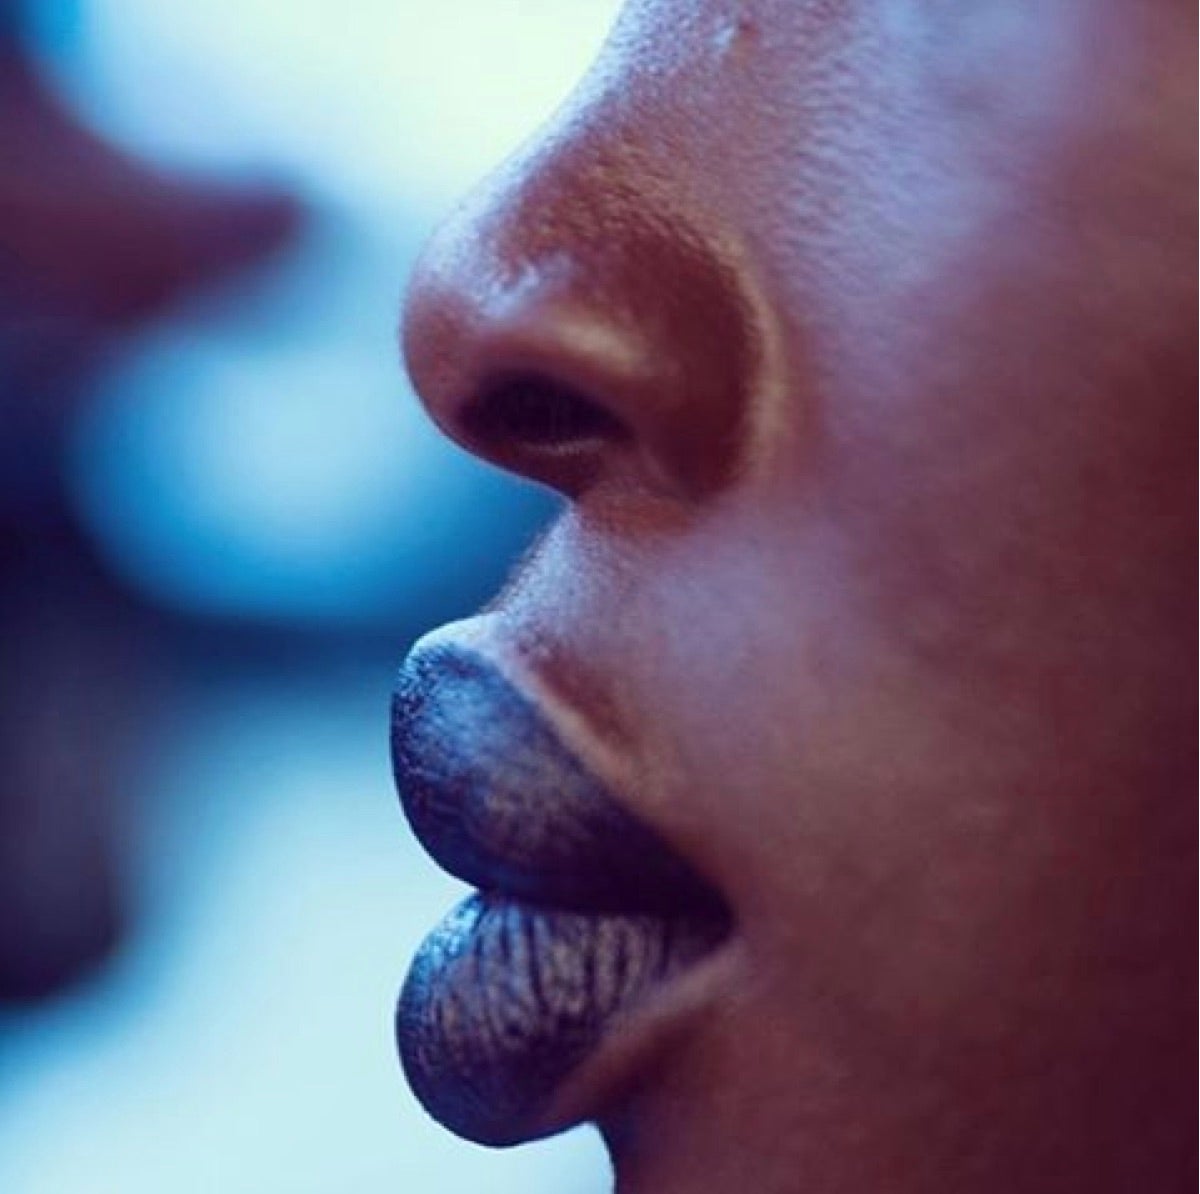 Black Women Celebrate Their Lips Following Racist Comments on MAC's Instagram Page
